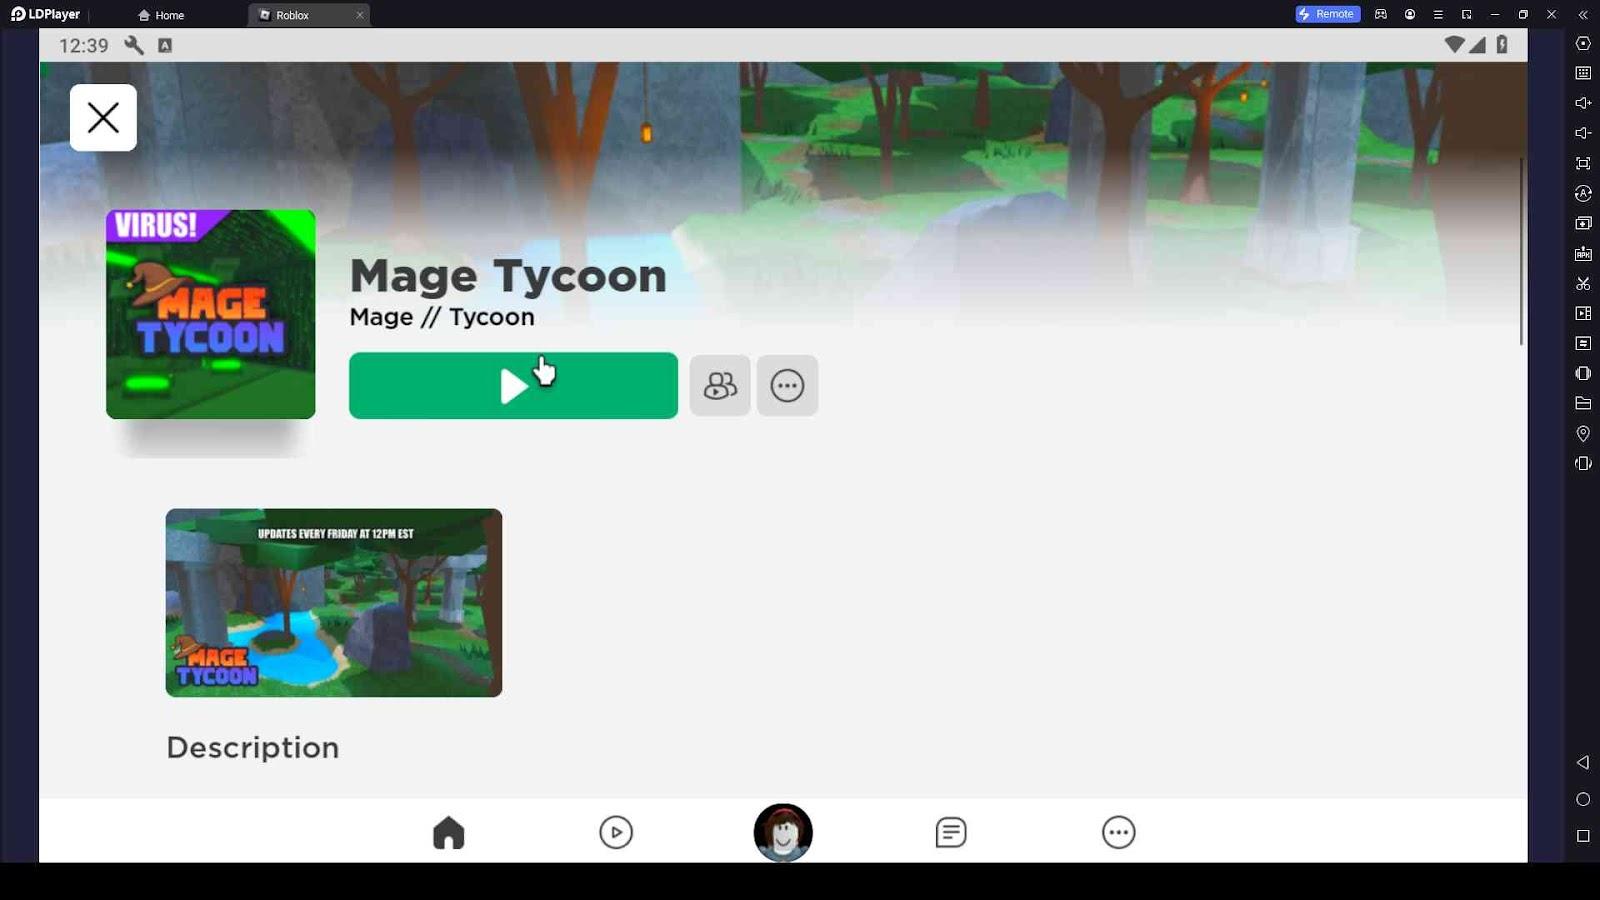 Mage Tycoon codes